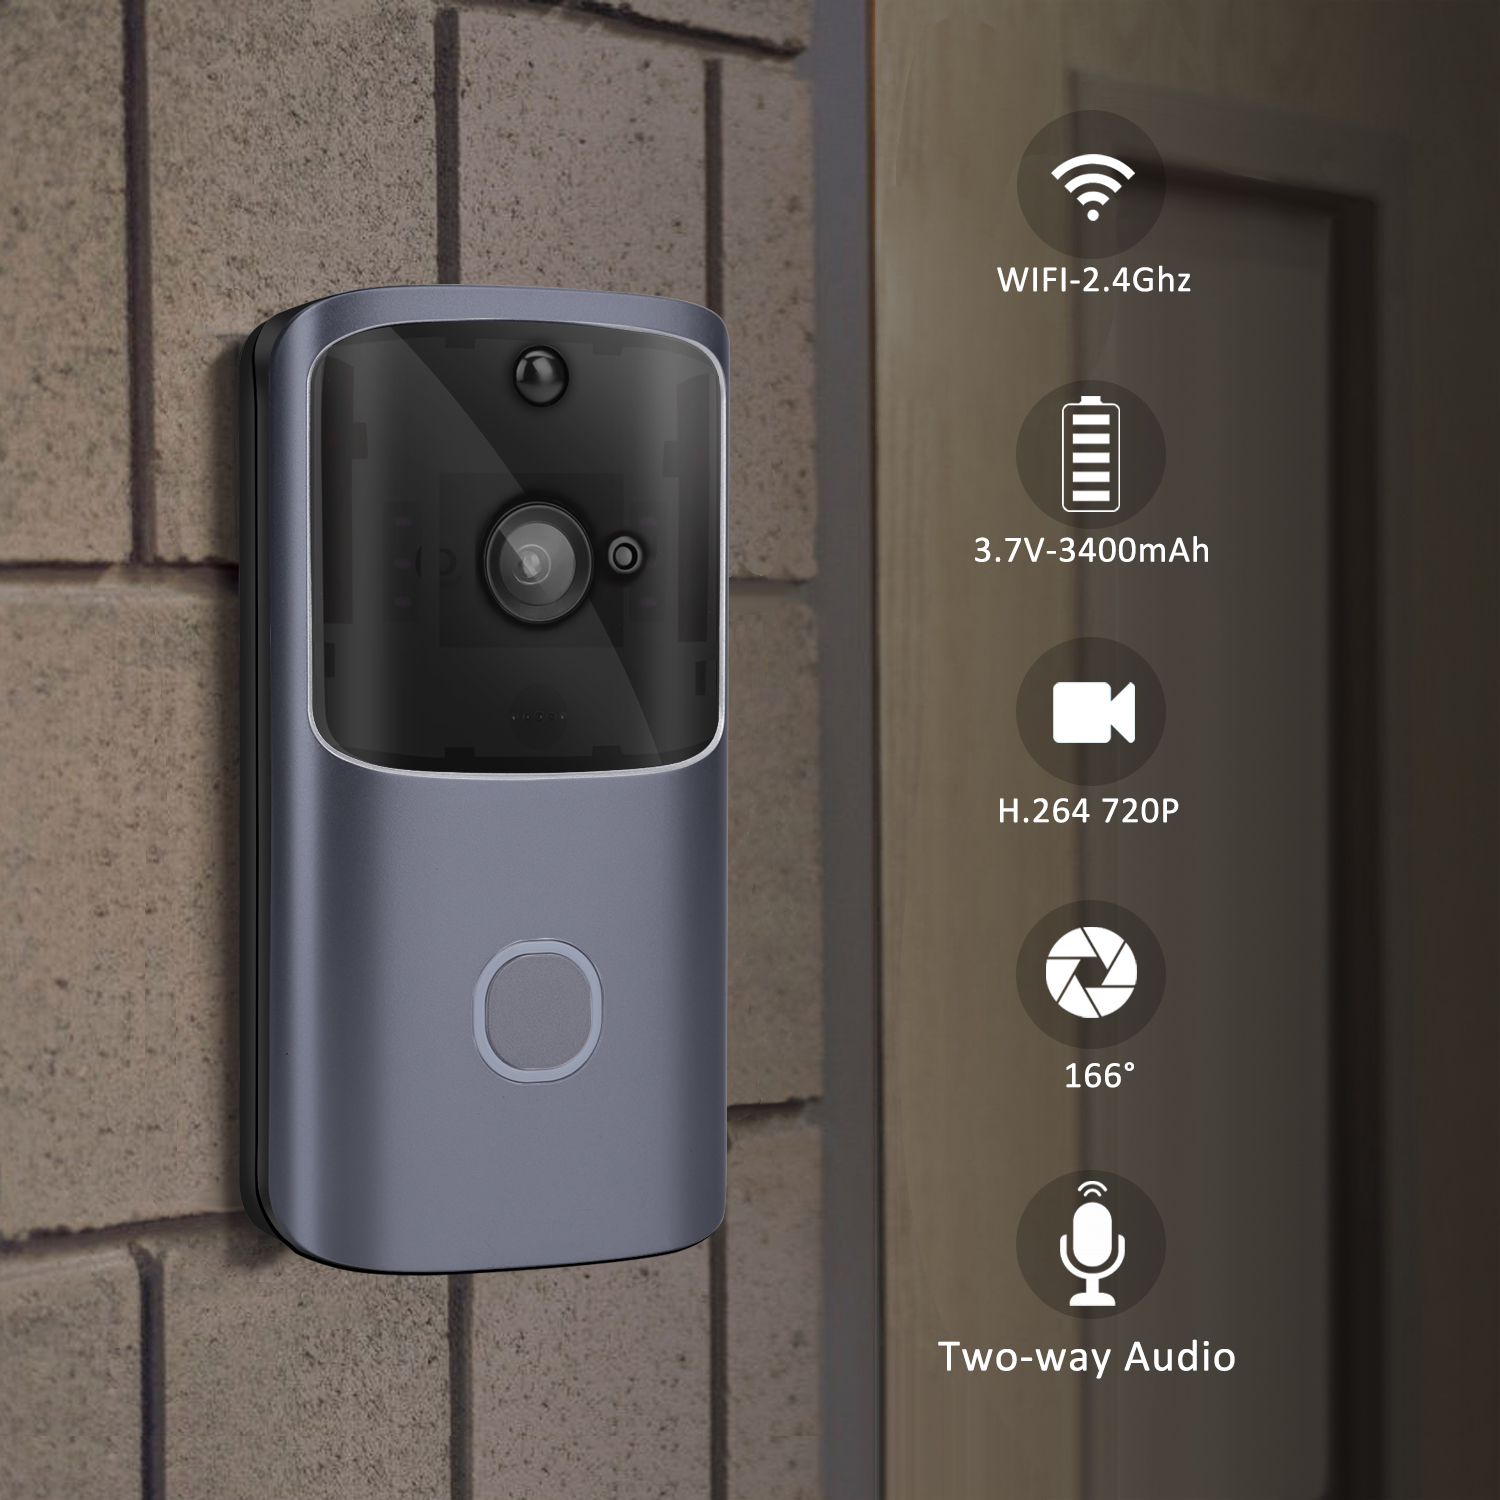 M10 WiFi Wireless Video Doorbell Camera Security Door Bell Visual Recording for Home Monitor Remotely Unlocks Intercoms Phone